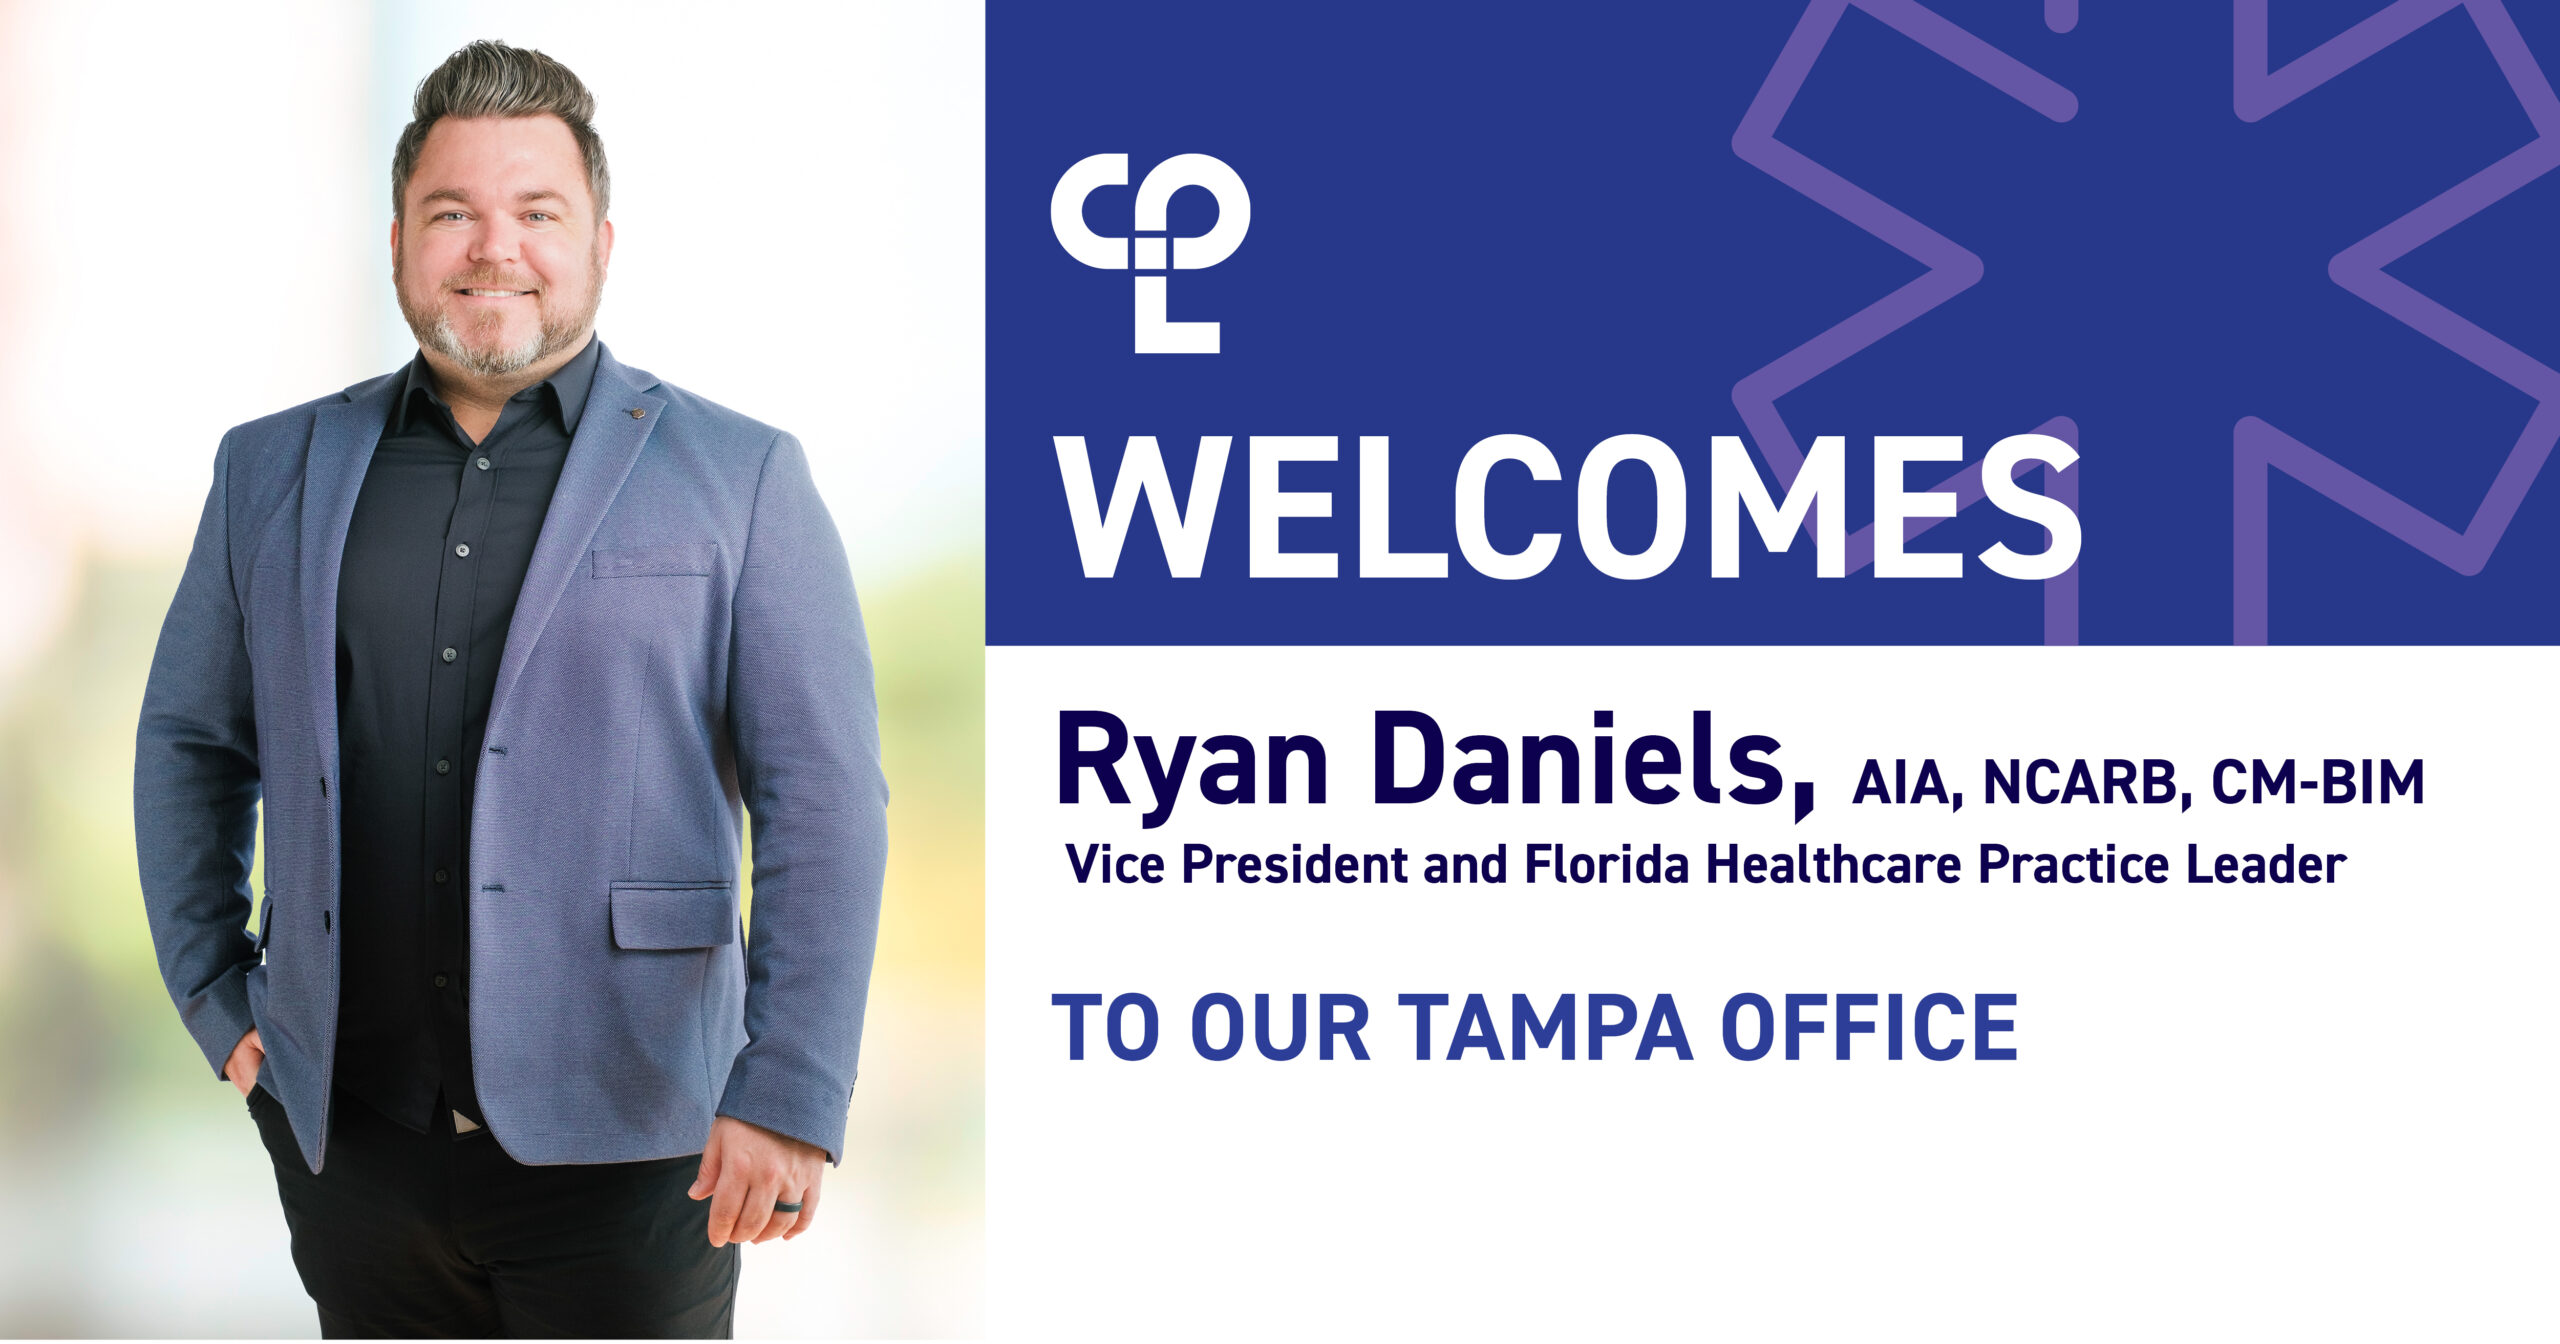 image is a graphic that shows on the right, a white man with gray hair spiked up who is smiling. He's wearing a black button up shirt with a gray blazer. On the right it reads "CPL welcomes Ryan Daniels Ryan Daniels AIA, NCARB, CM-BIM Vice President and Florida Healthcare Practice Leader to our Tampa office"